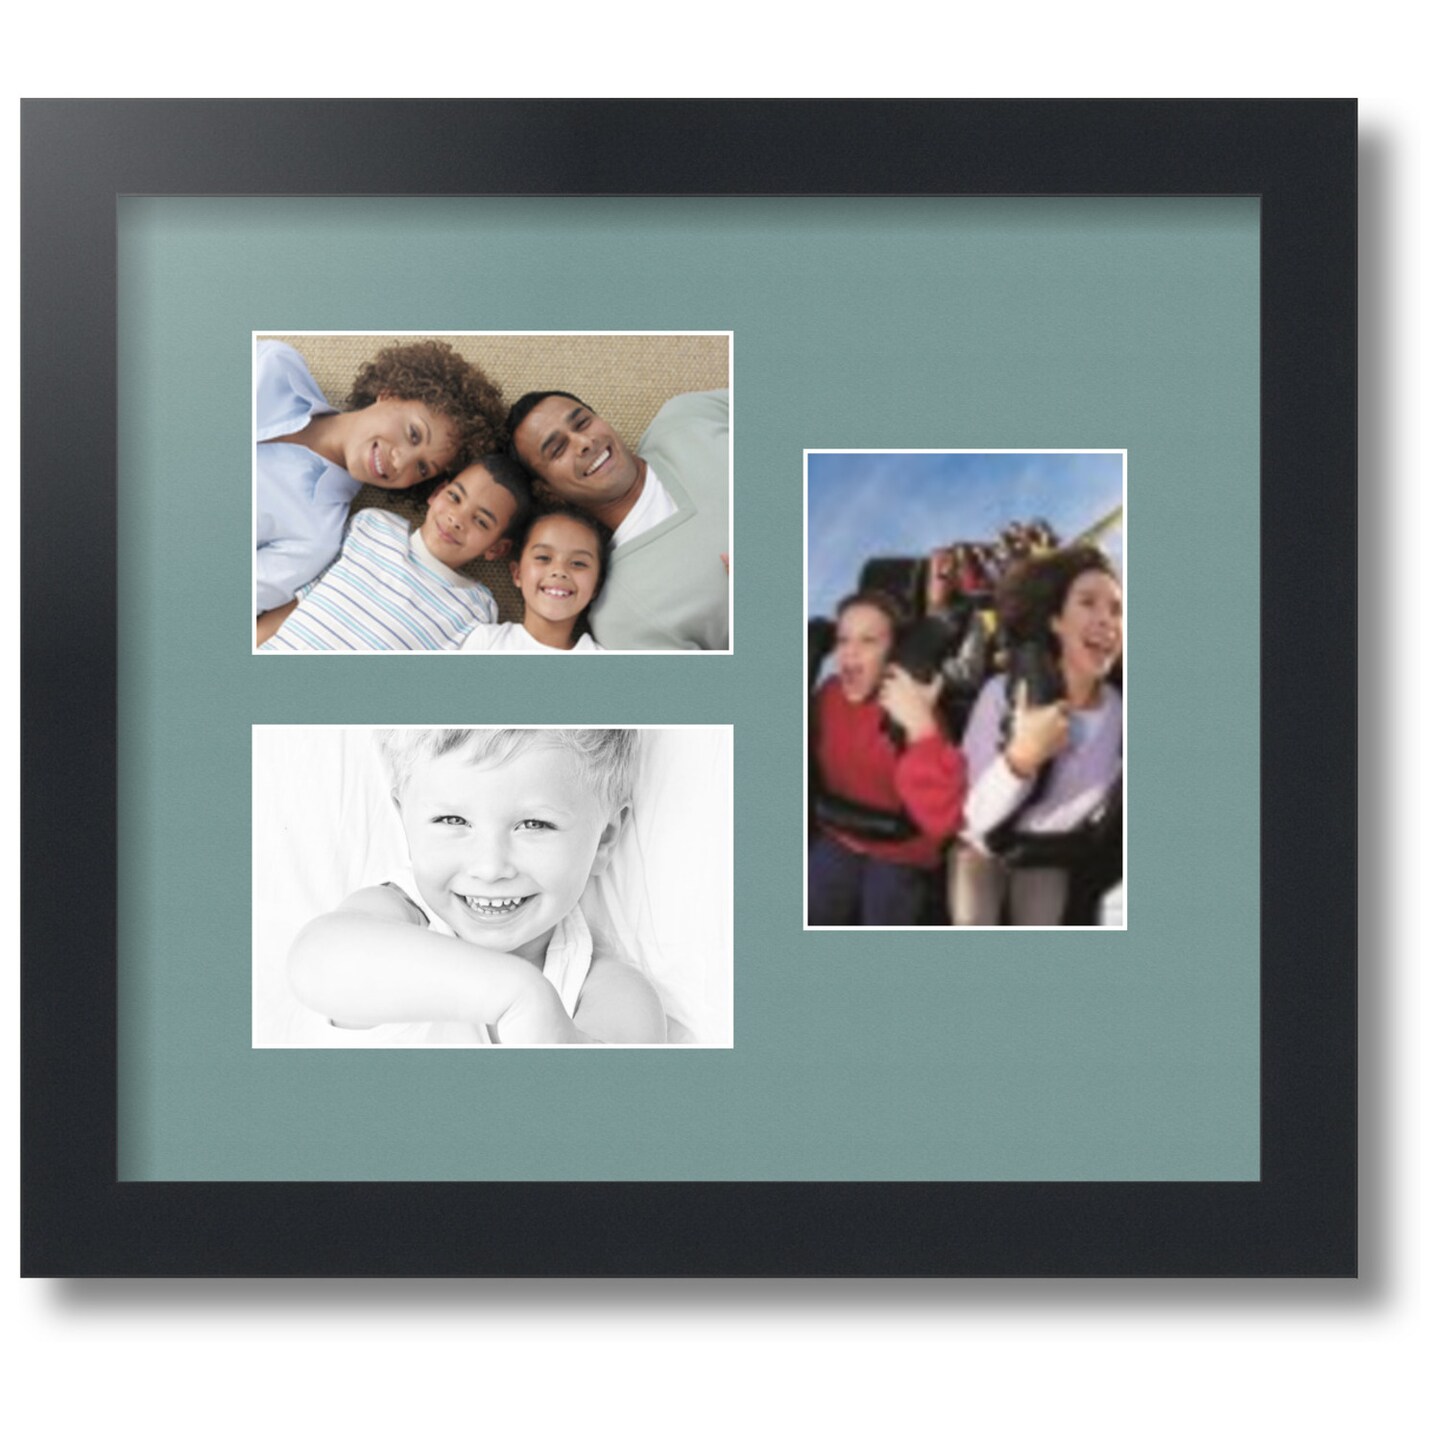 Mainstays 7-Opening 4 x 6 Wide Bevel Black Collage Picture Frame 